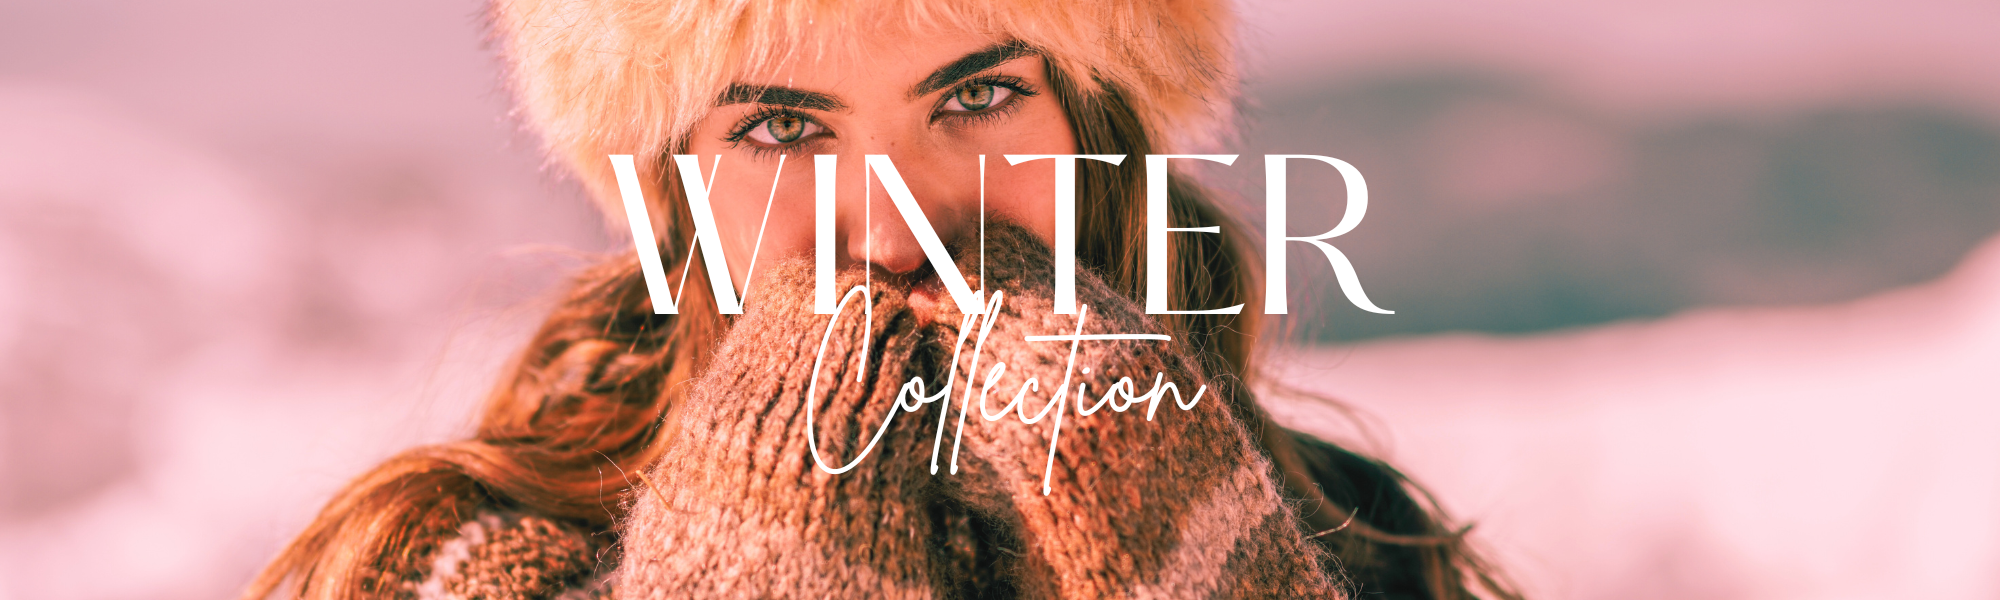 Women's Winter Clothing Collection